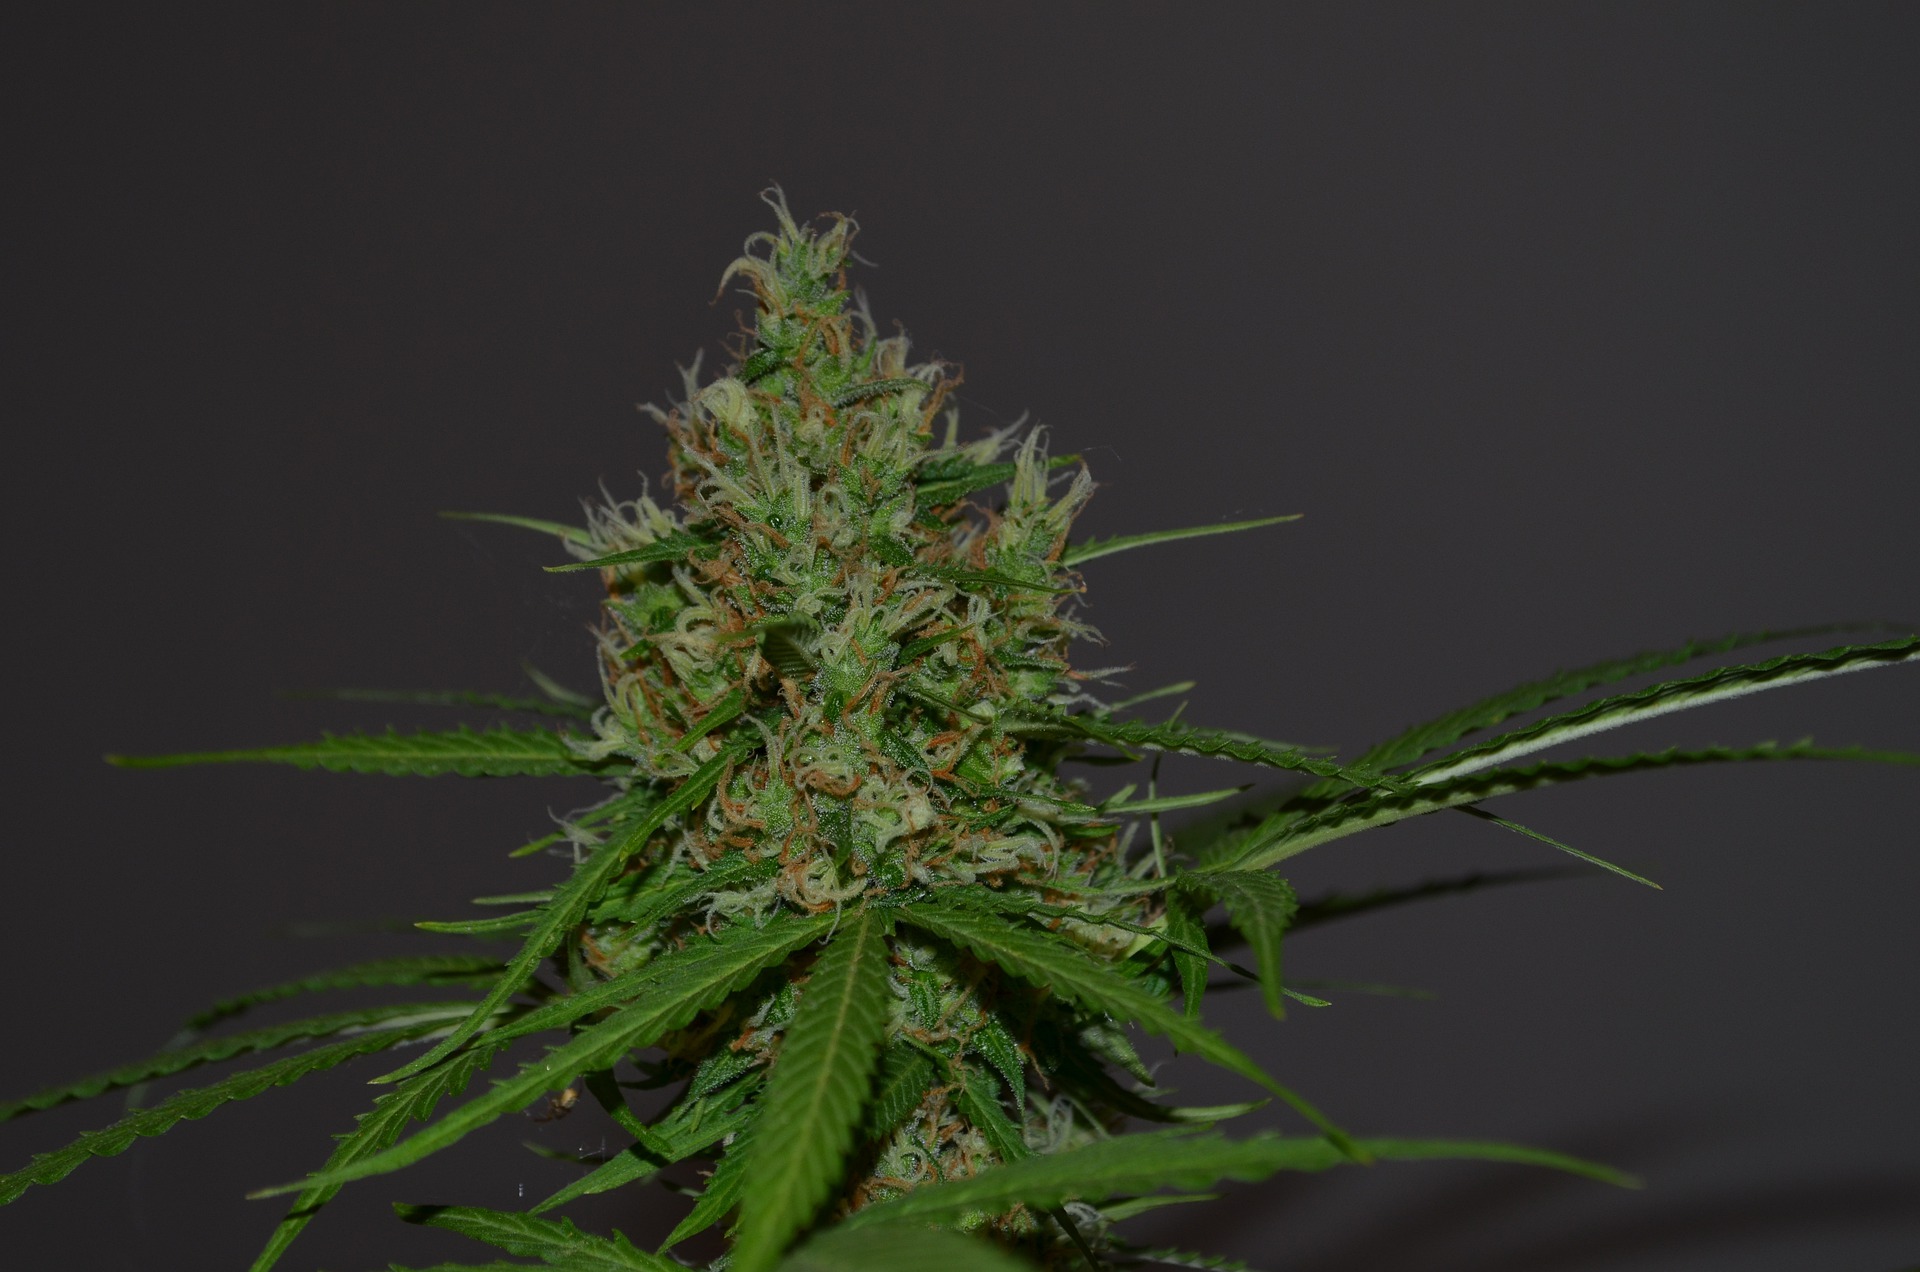 What Is the Best Option for Cannabis - Delta-8 Flowers or CBD Flowers?